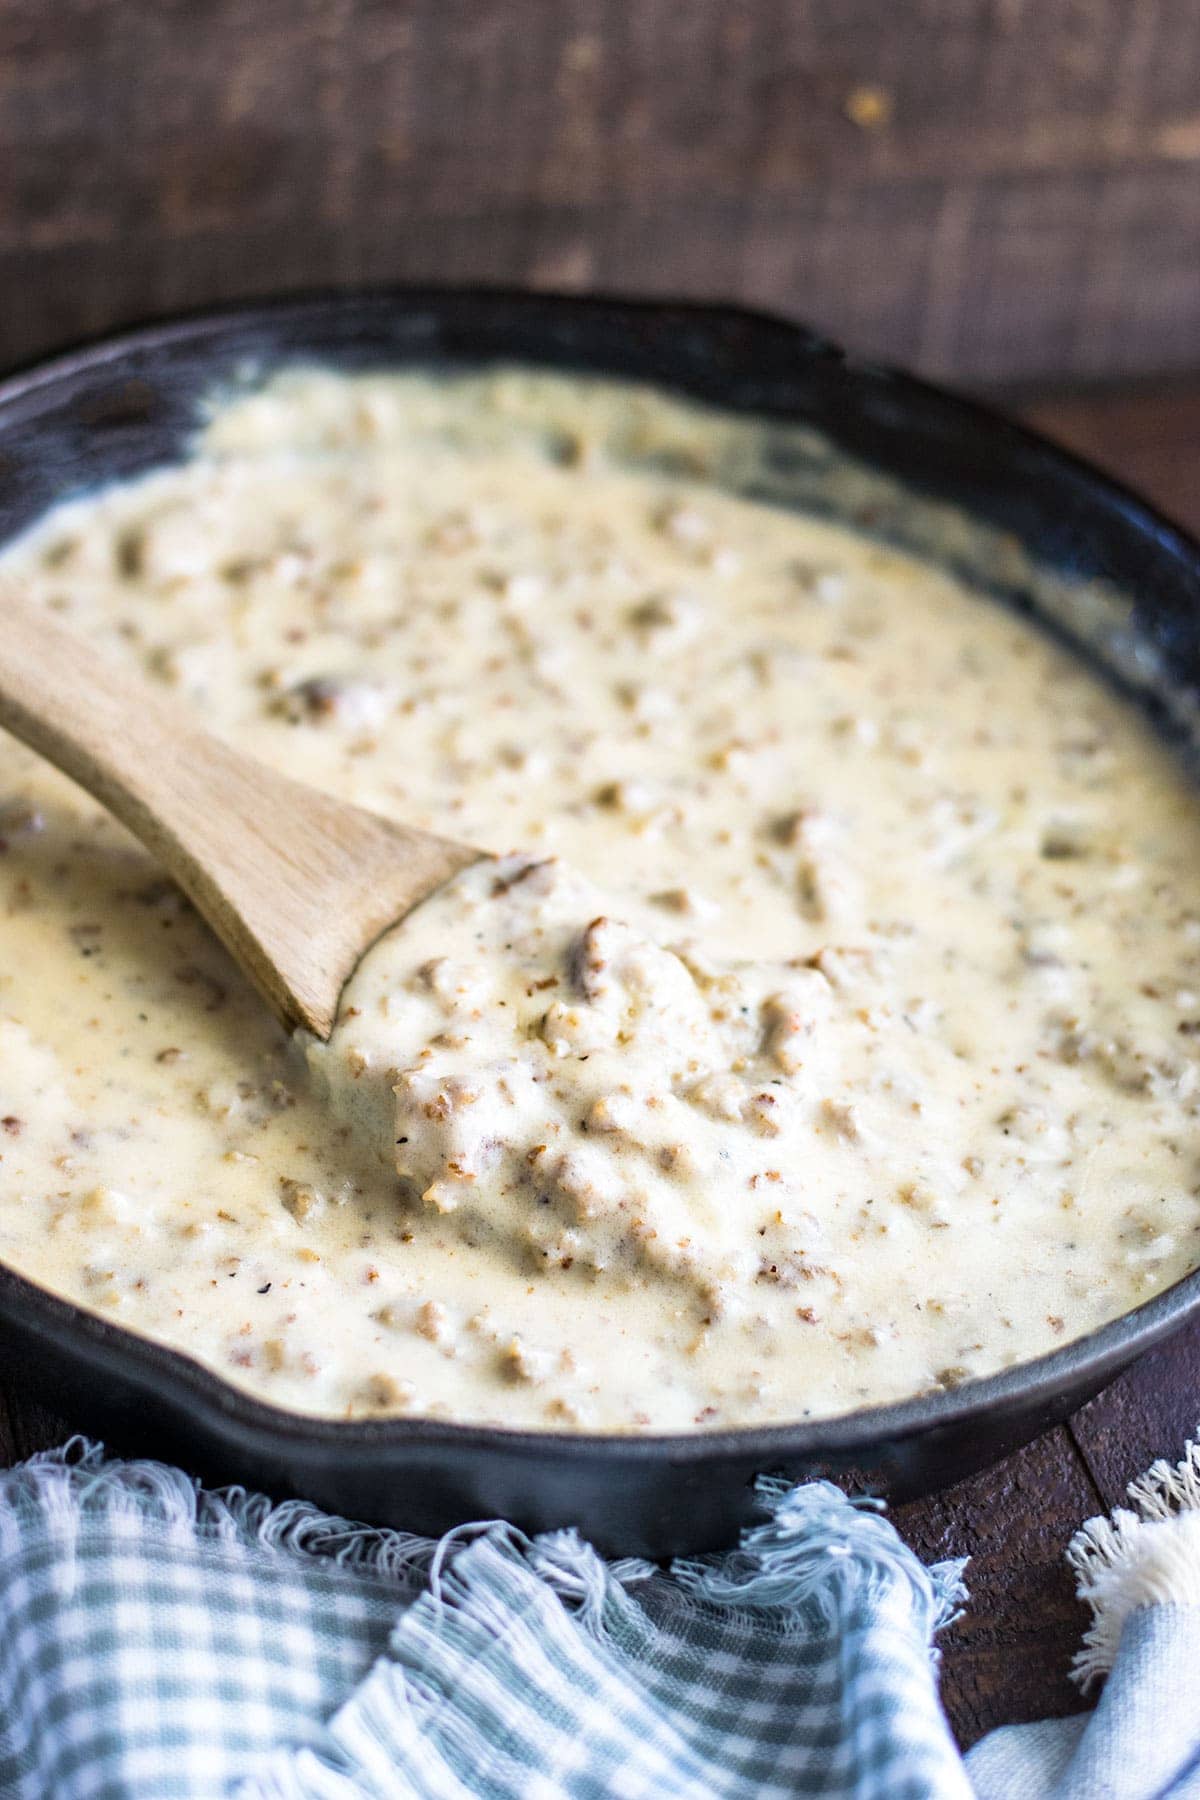 Cast iron skillet of homemade creamy sausage gravy set on a wooden tray.